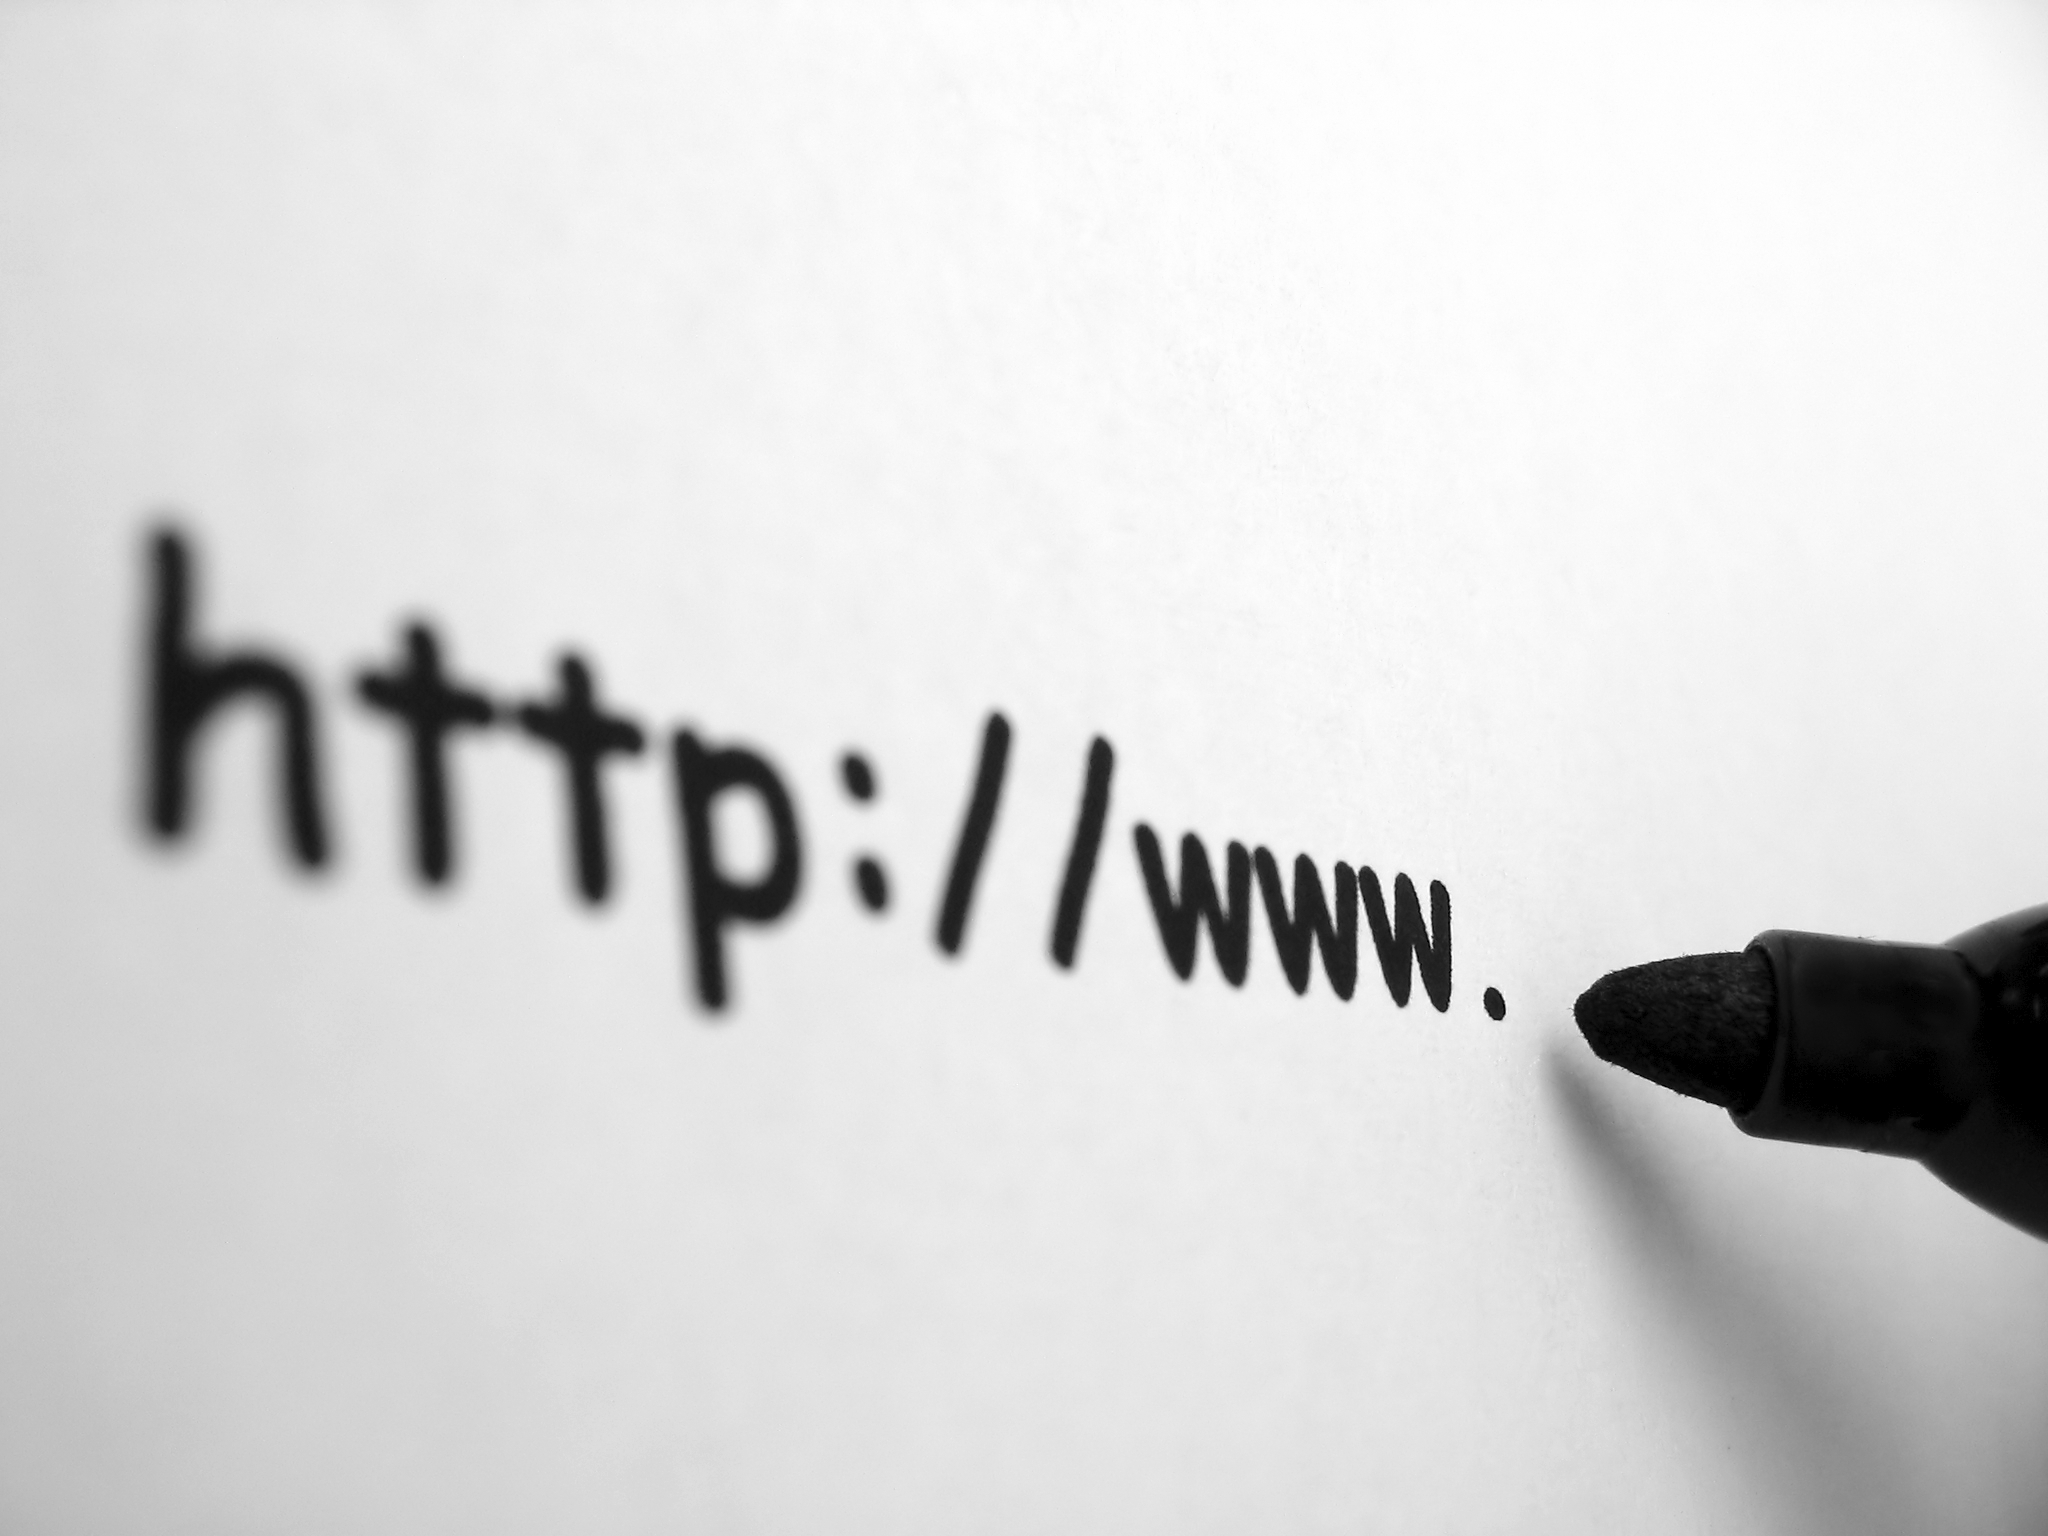 London gets its own domain name  Broadband Cloud Solutions